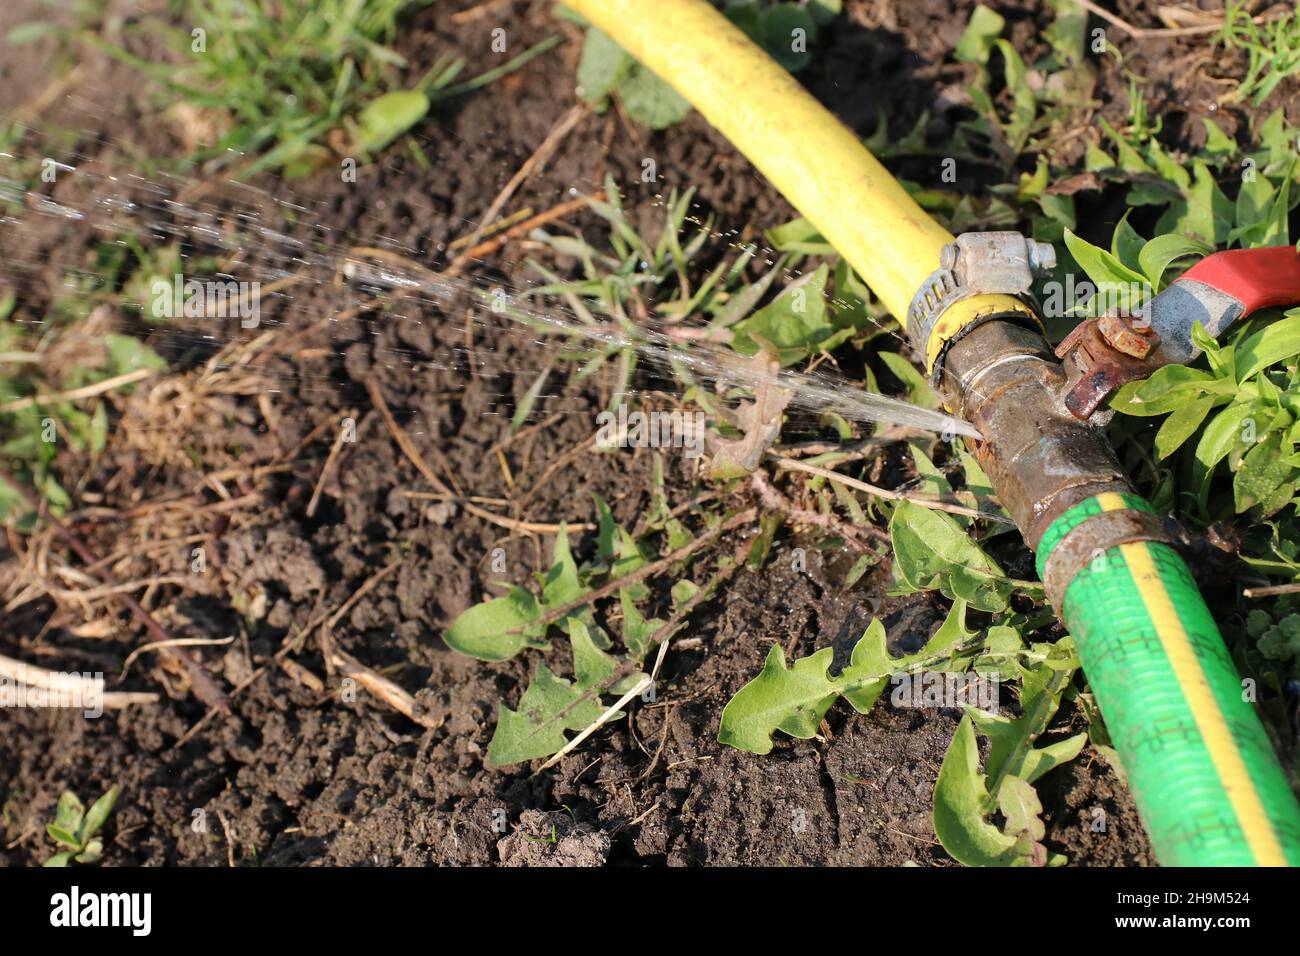 Two garden hoses joined with an old rusted shut off valve, springs a leak Stock Photo